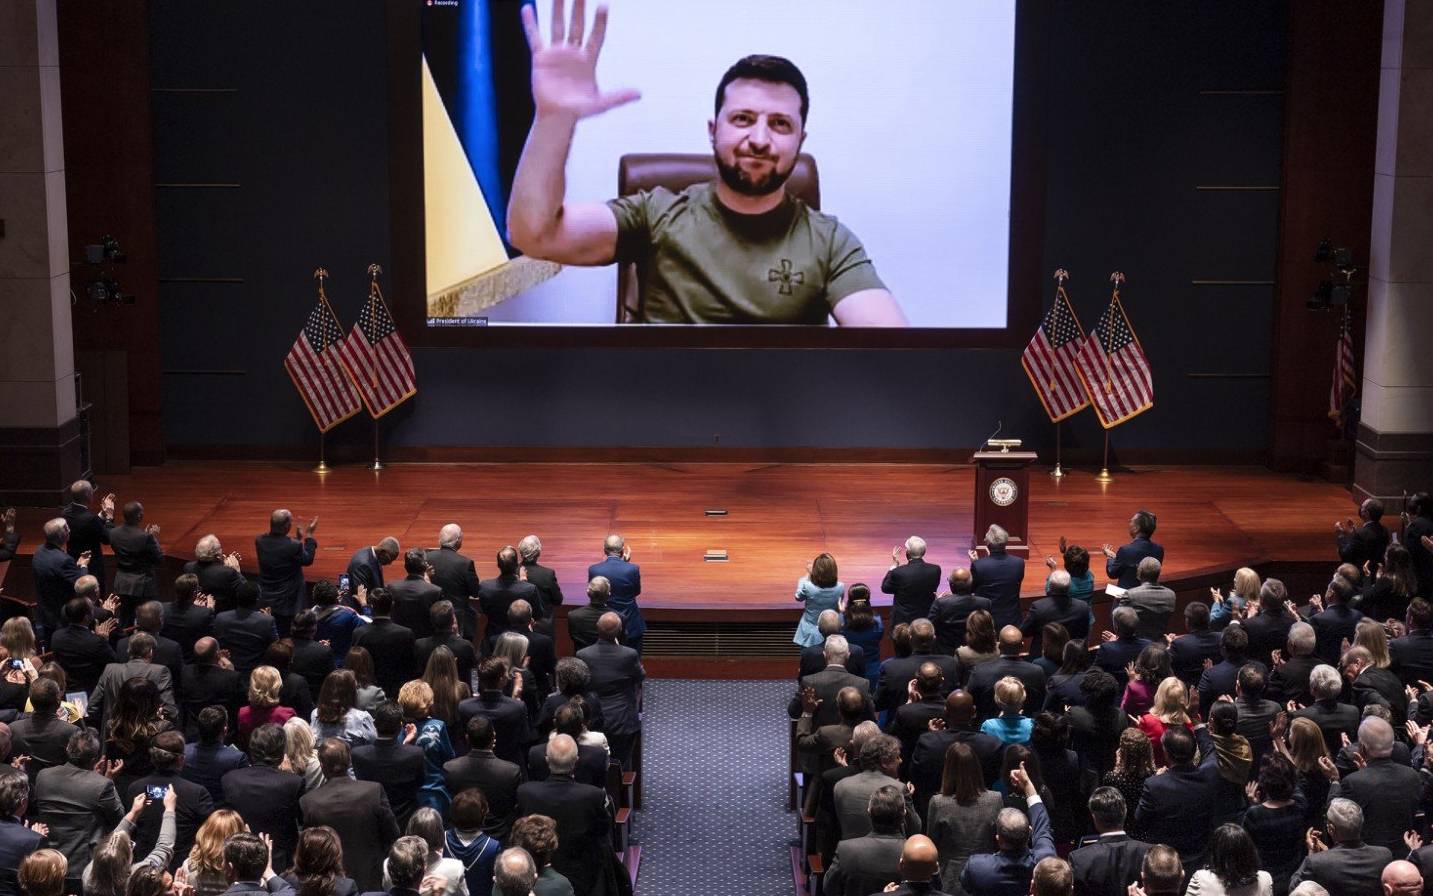 Ukrainian President Volodymyr Zelensky virtually addresses the US Congress on March 16, 2022, at the US Capitol Visitor Center Congressional Auditorium, in Washington, DC. (Photo by J. Scott Applewhite / POOL / AFP)